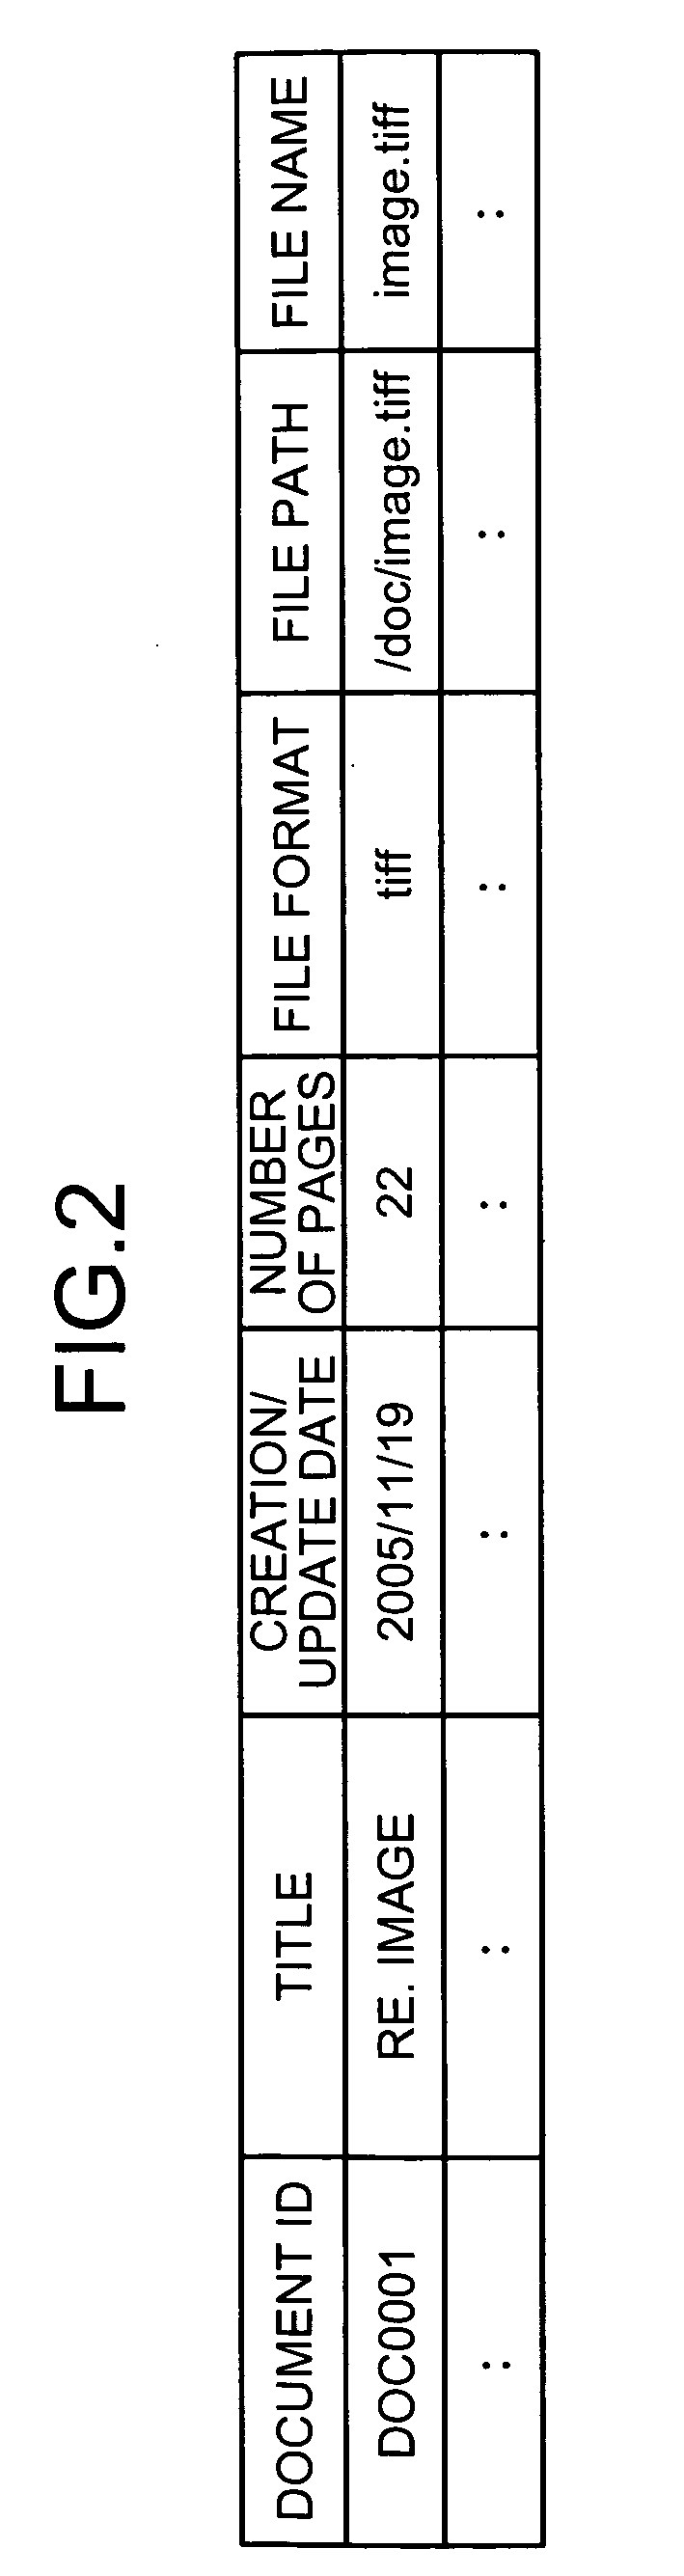 Method and apparatus for managing information, and computer program product